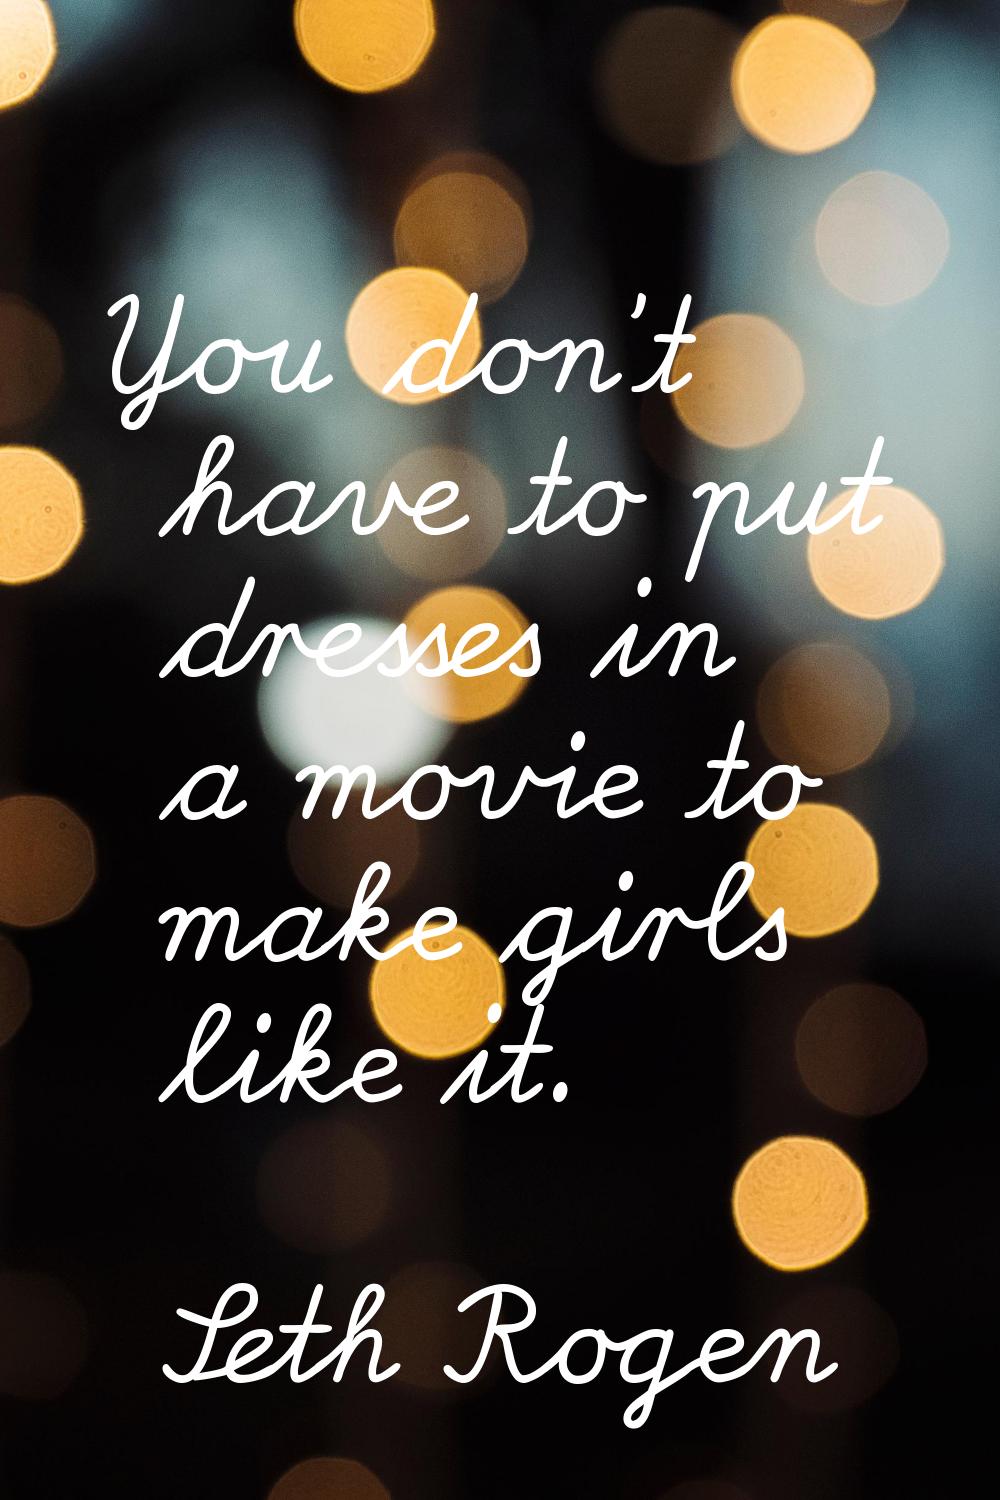 You don't have to put dresses in a movie to make girls like it.